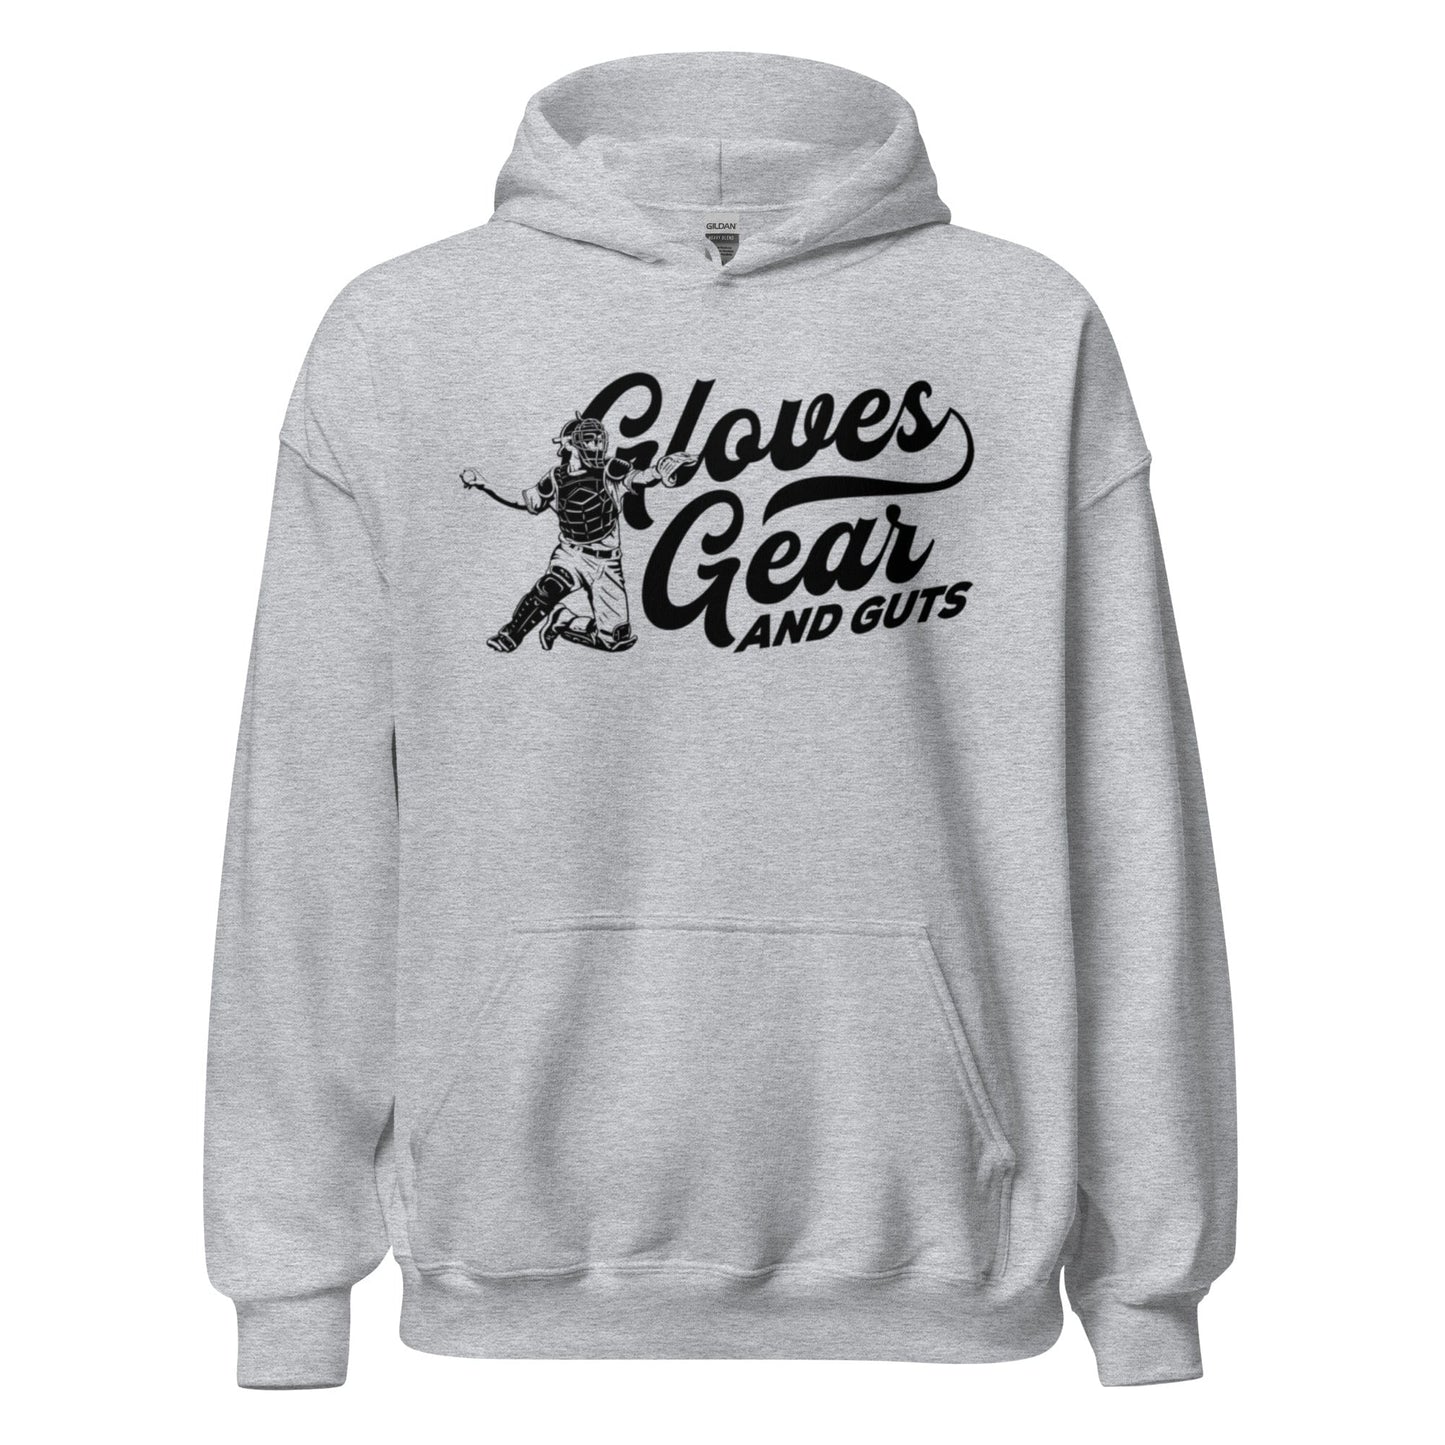 Gloves Gear And Guts - Adult Hoodie